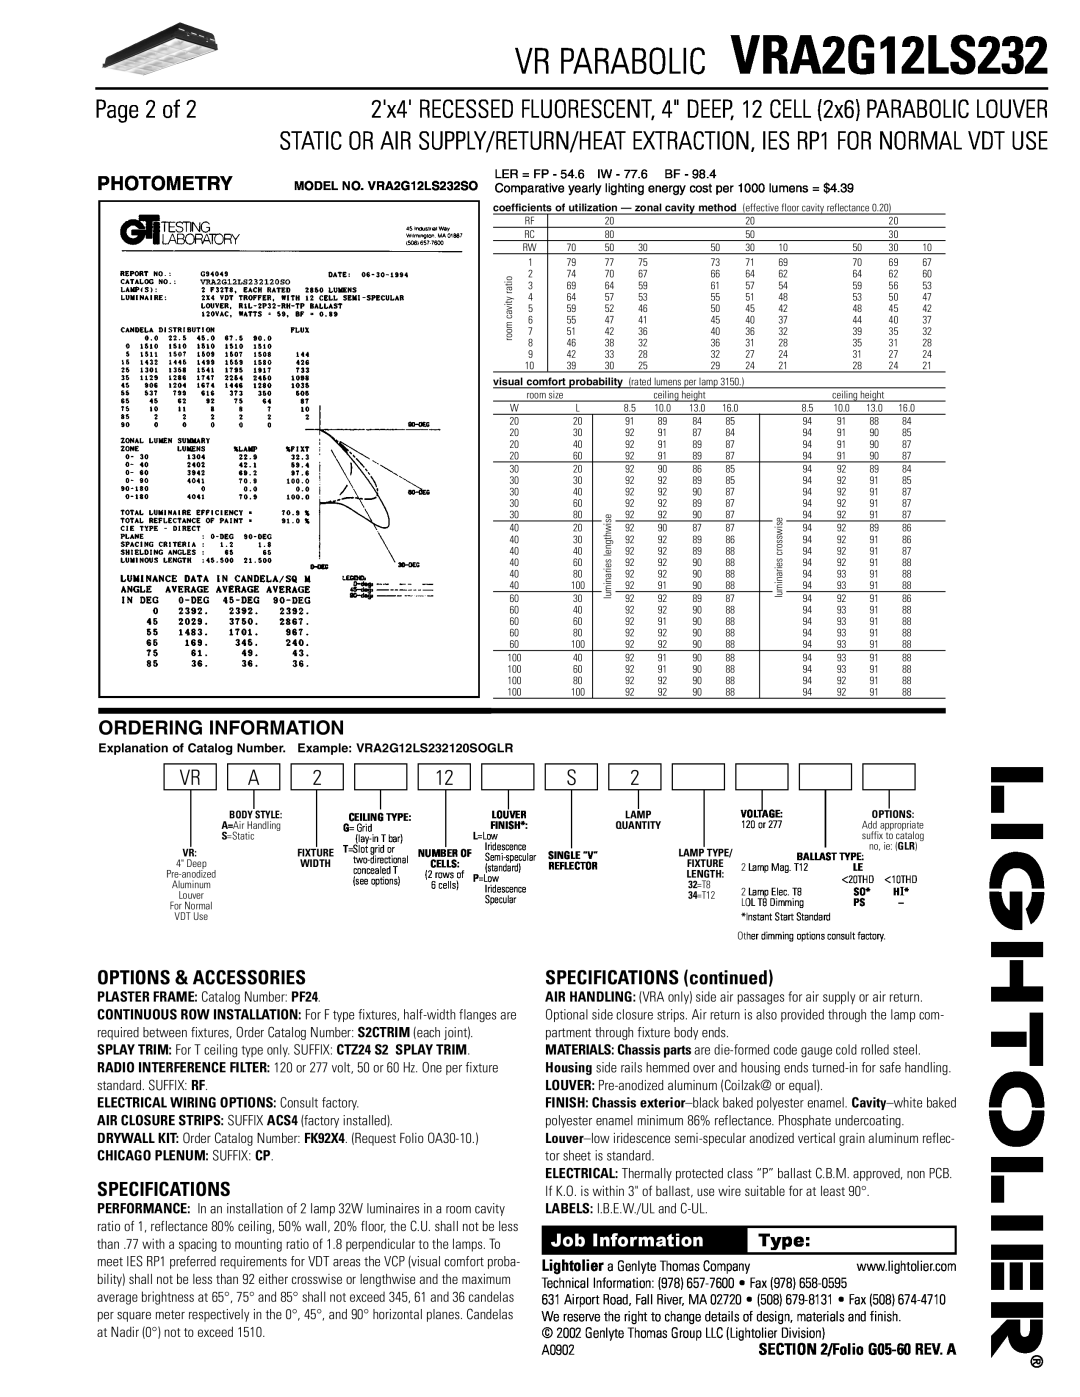 Lightolier VRA2G12LS232 Page 2 of, Options & Accessories, Specifications, SPECIFICATIONS continued, Photometry, Type 